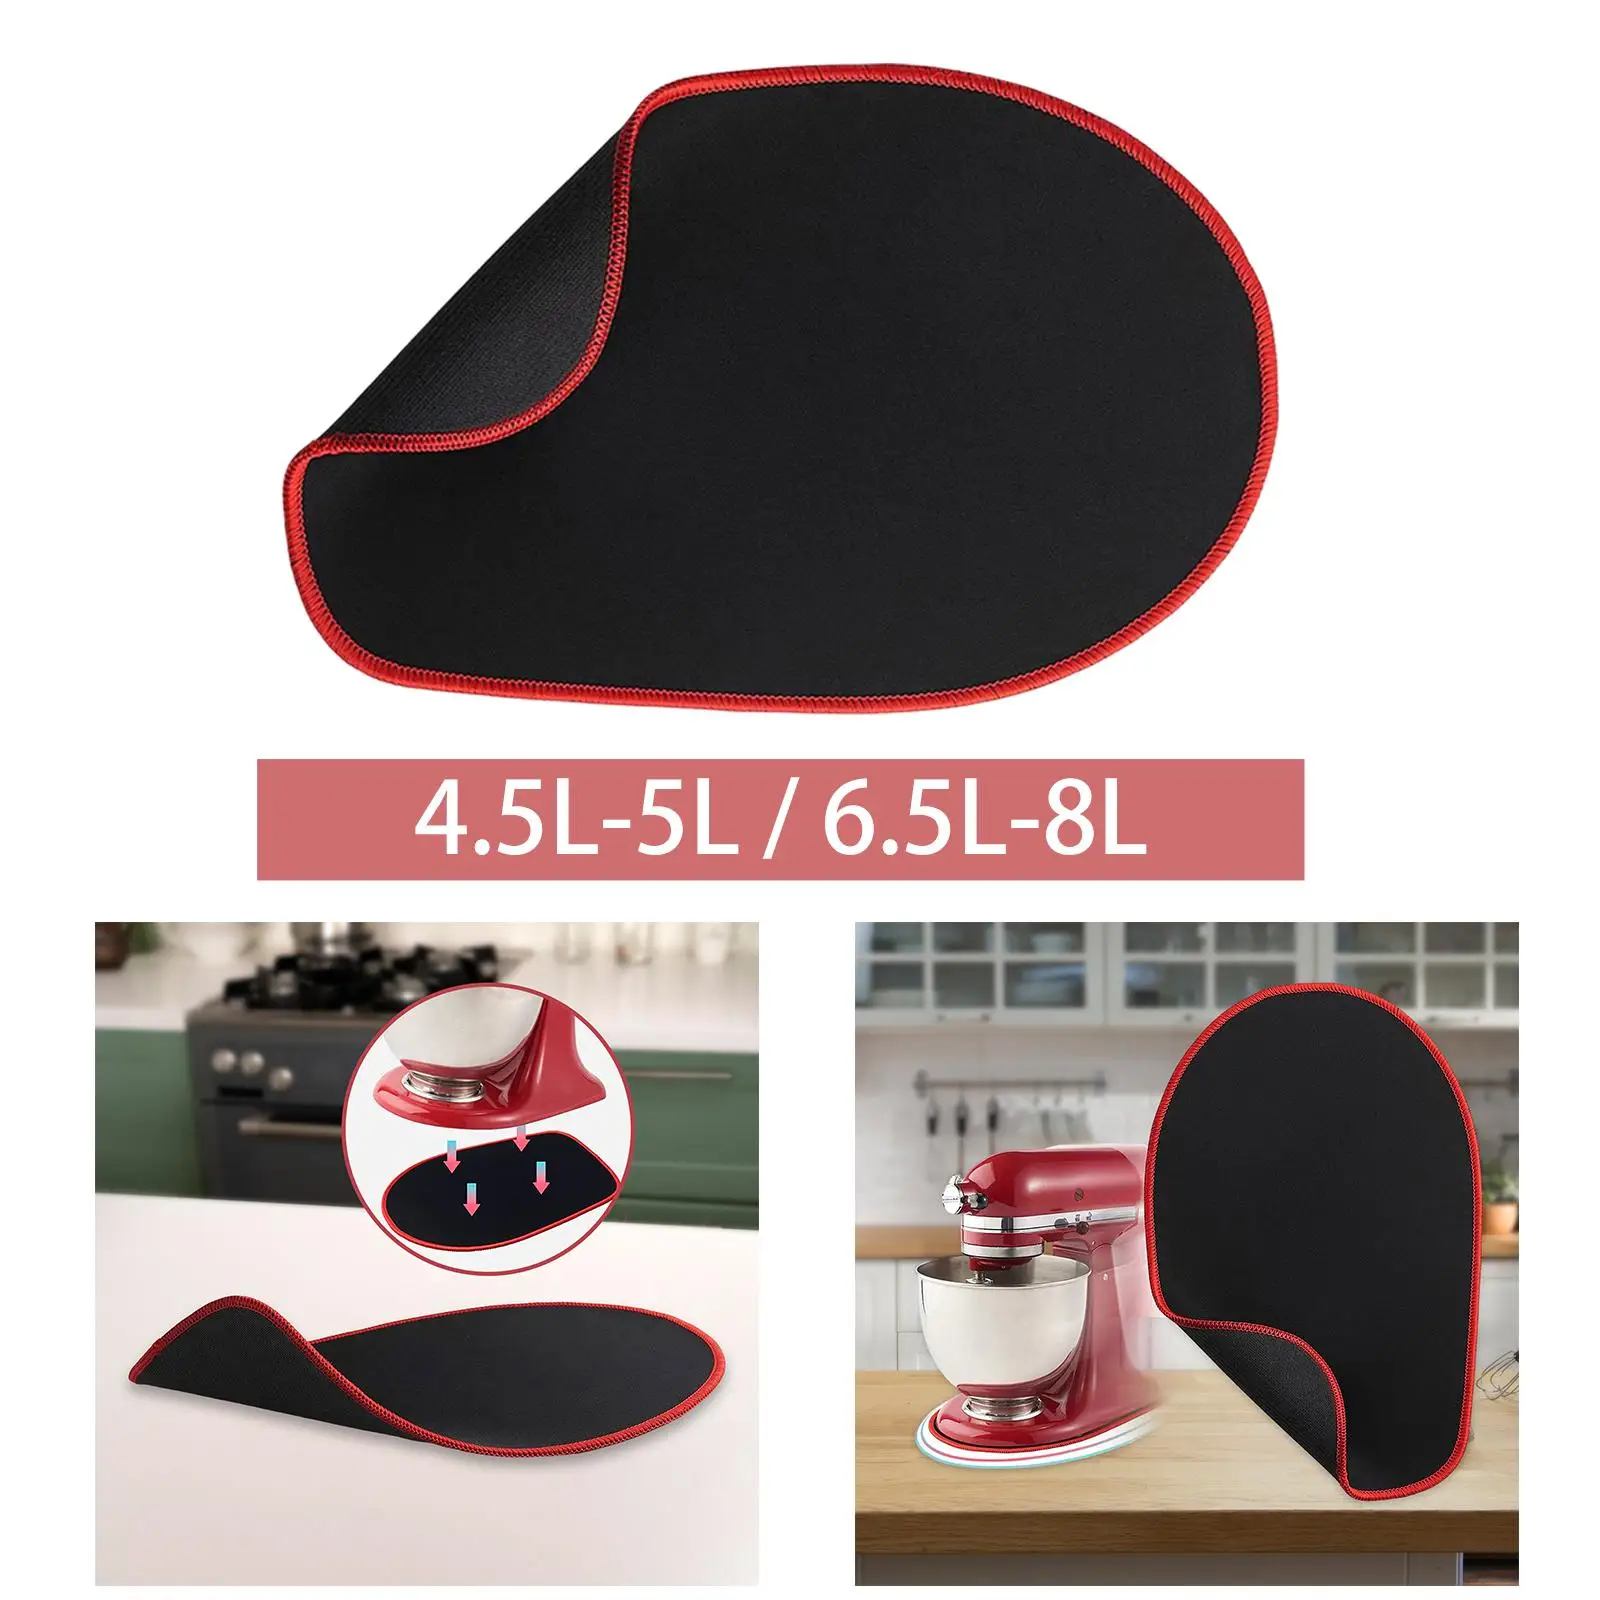 Kitchen Mixer Cover Mover Moving Matting Mixers Kitchen Cover Appliances Slider mixer Mixer Slider Mat for Countertop